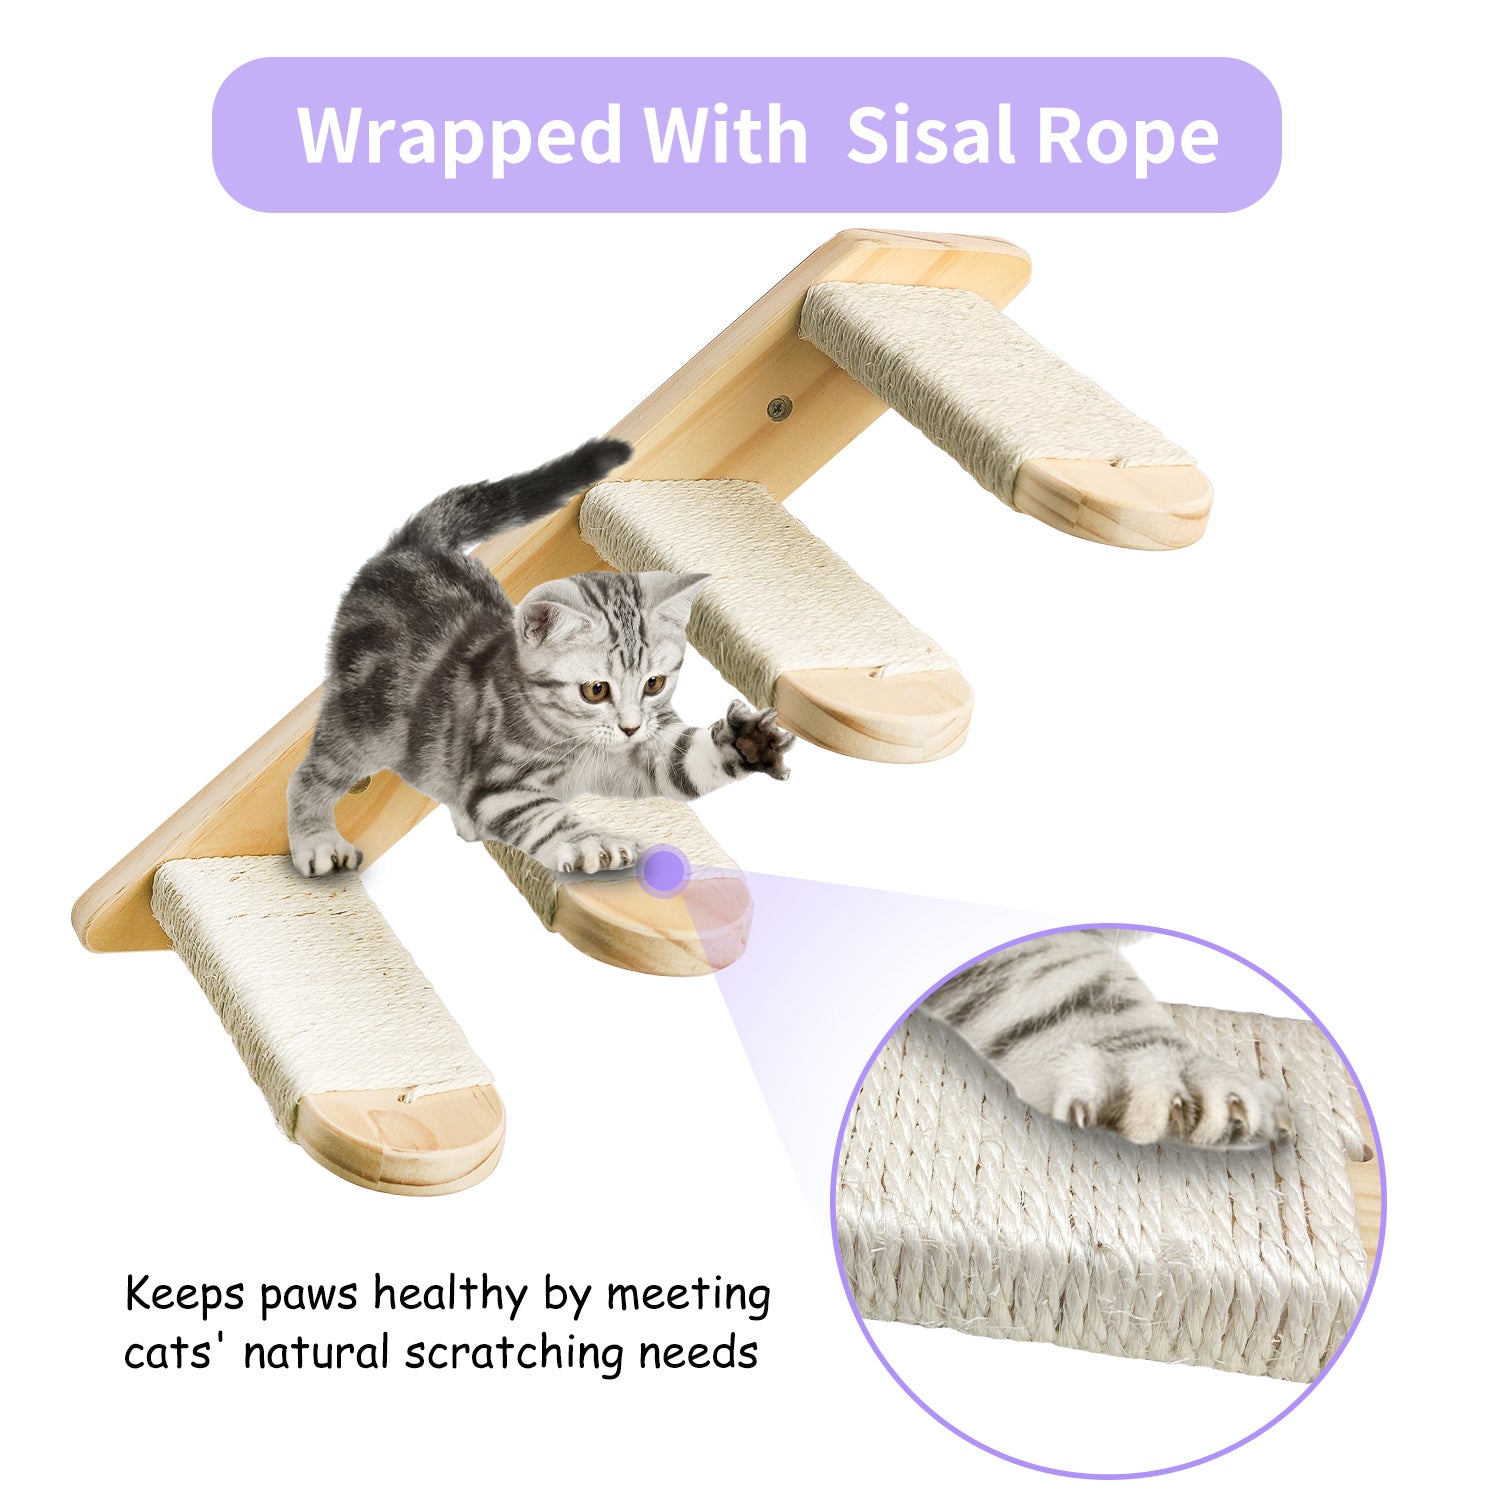 Arkham Pet Cat Climbing Shelf Wall Mounted, 4 Steps Cat Stairway with Sisal Rope Scratching for Cats Perch Platform, Cat Wall Furniture, Reversible Direction Cat Wall Stairs Ladder